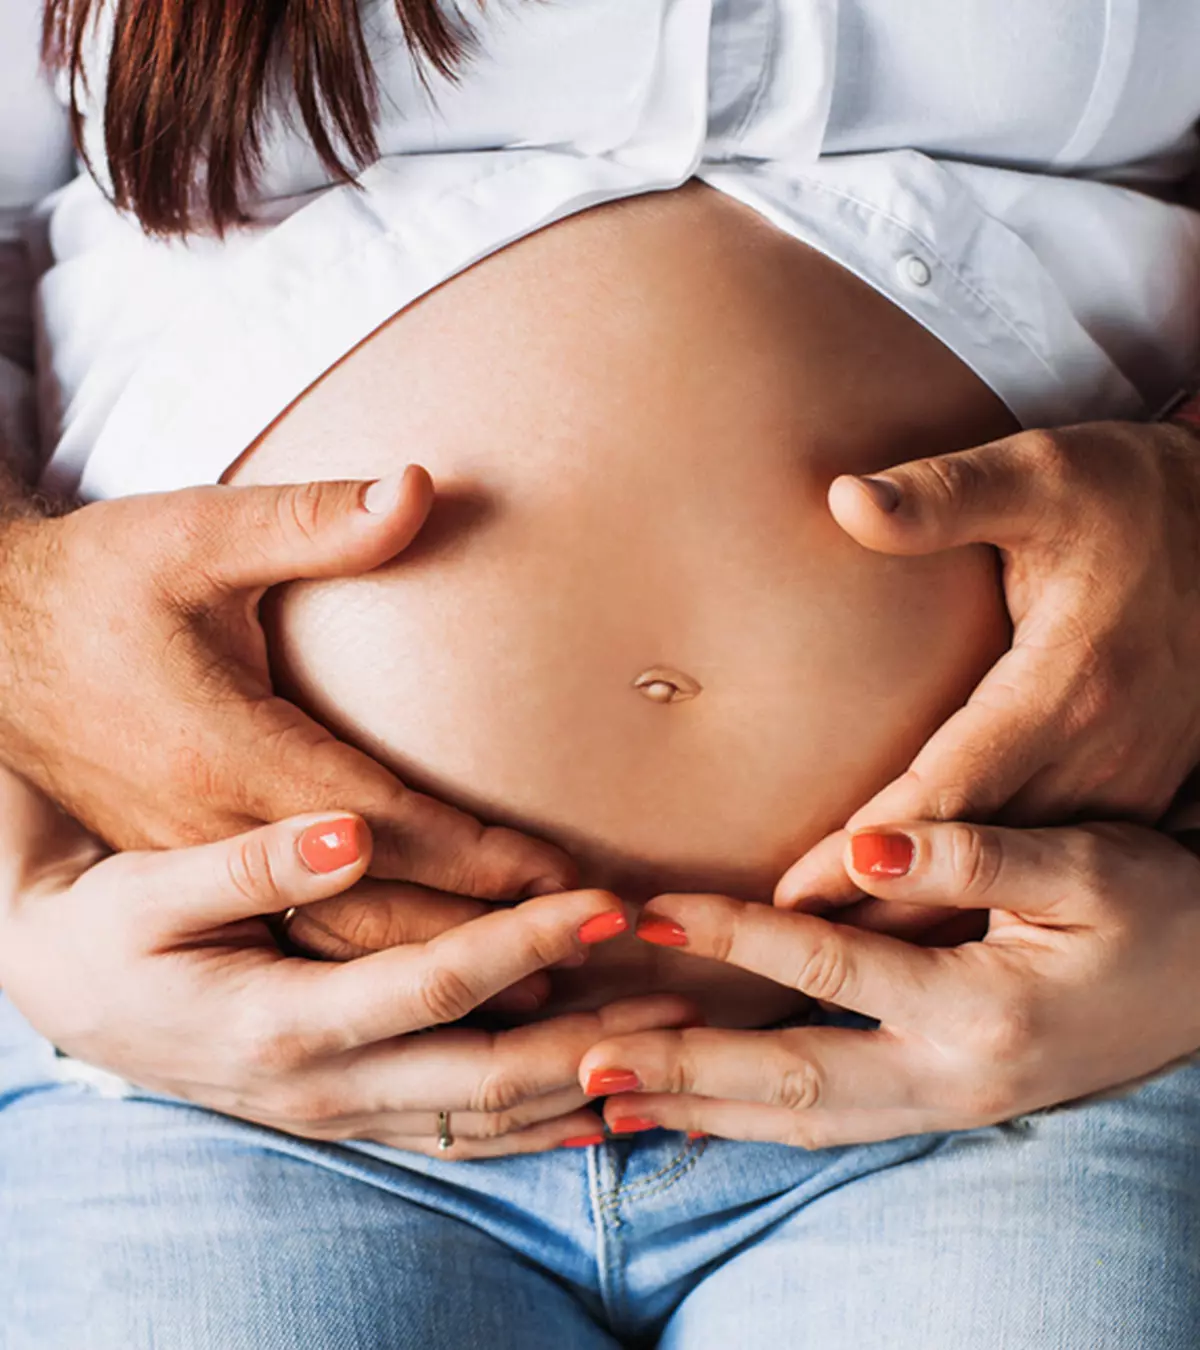 8 Men Reveal What They Thought Of Their Partner's Body When She Was Pregnant